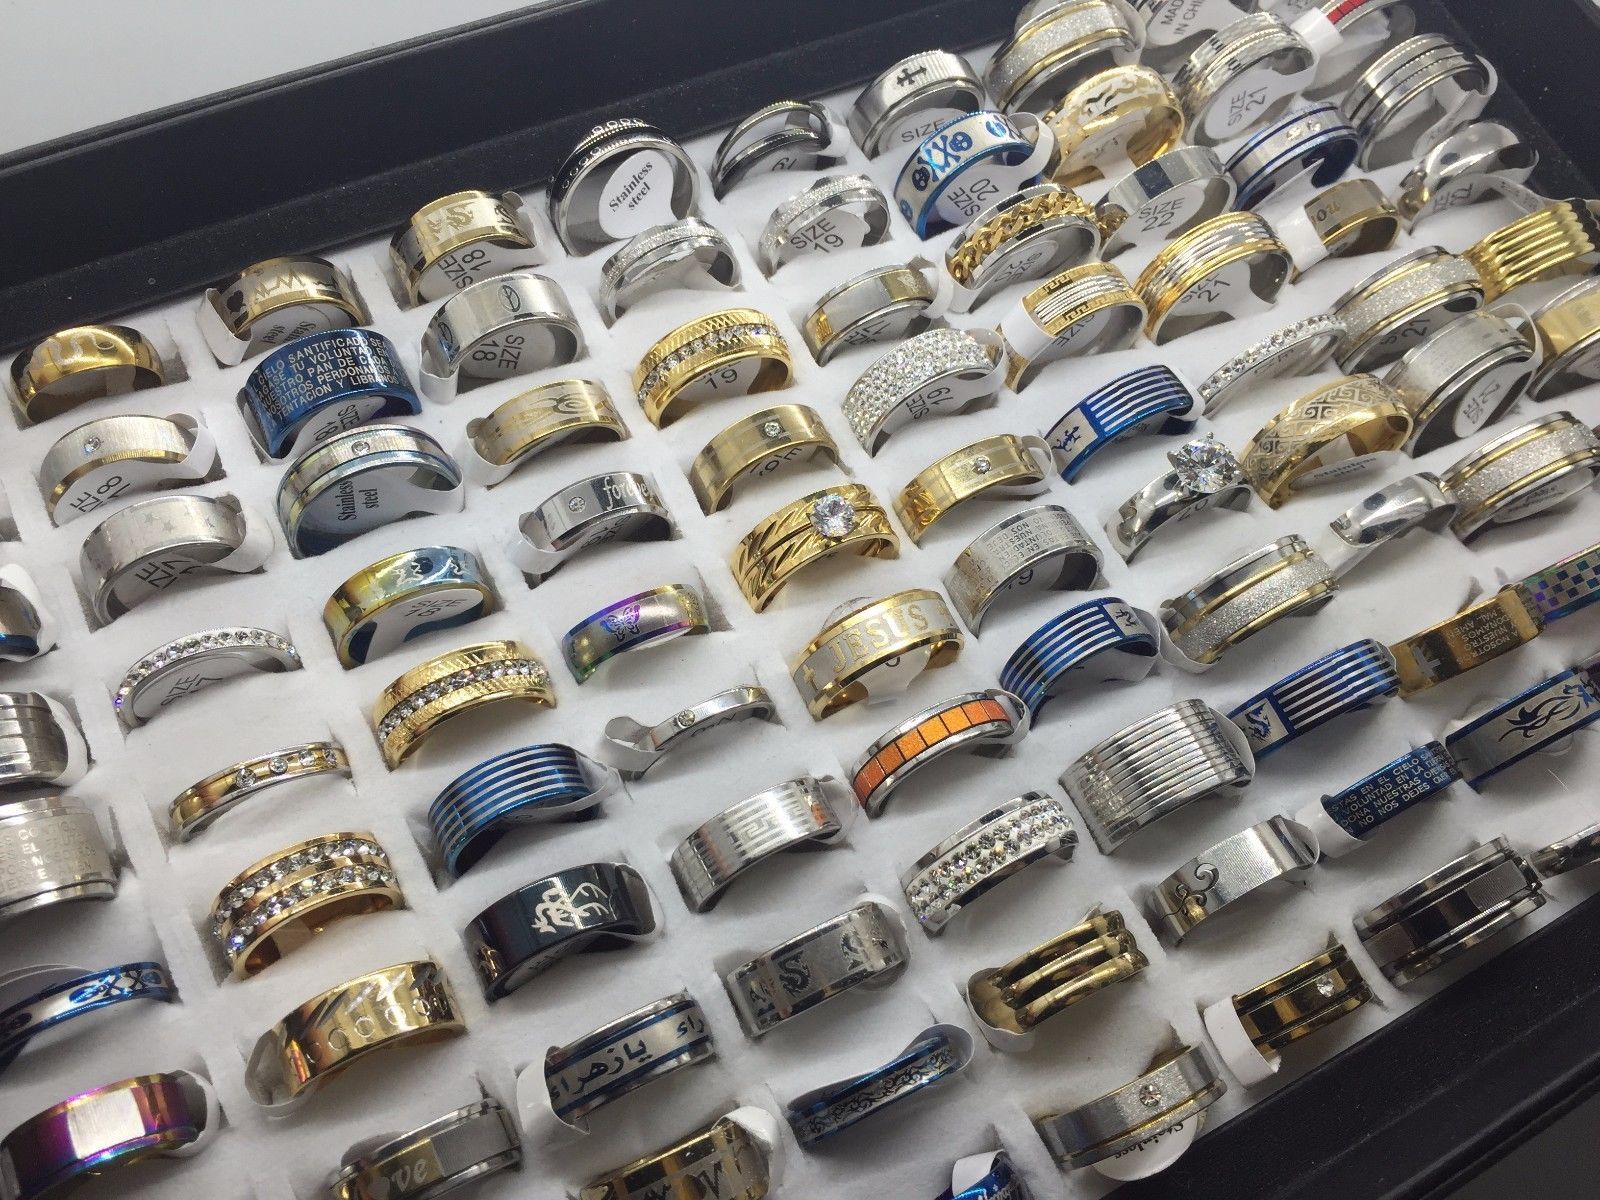 100x Cat Eye Color Mix Stainless Steel Band Ring Wholesale Fashion Jewelry Lots 